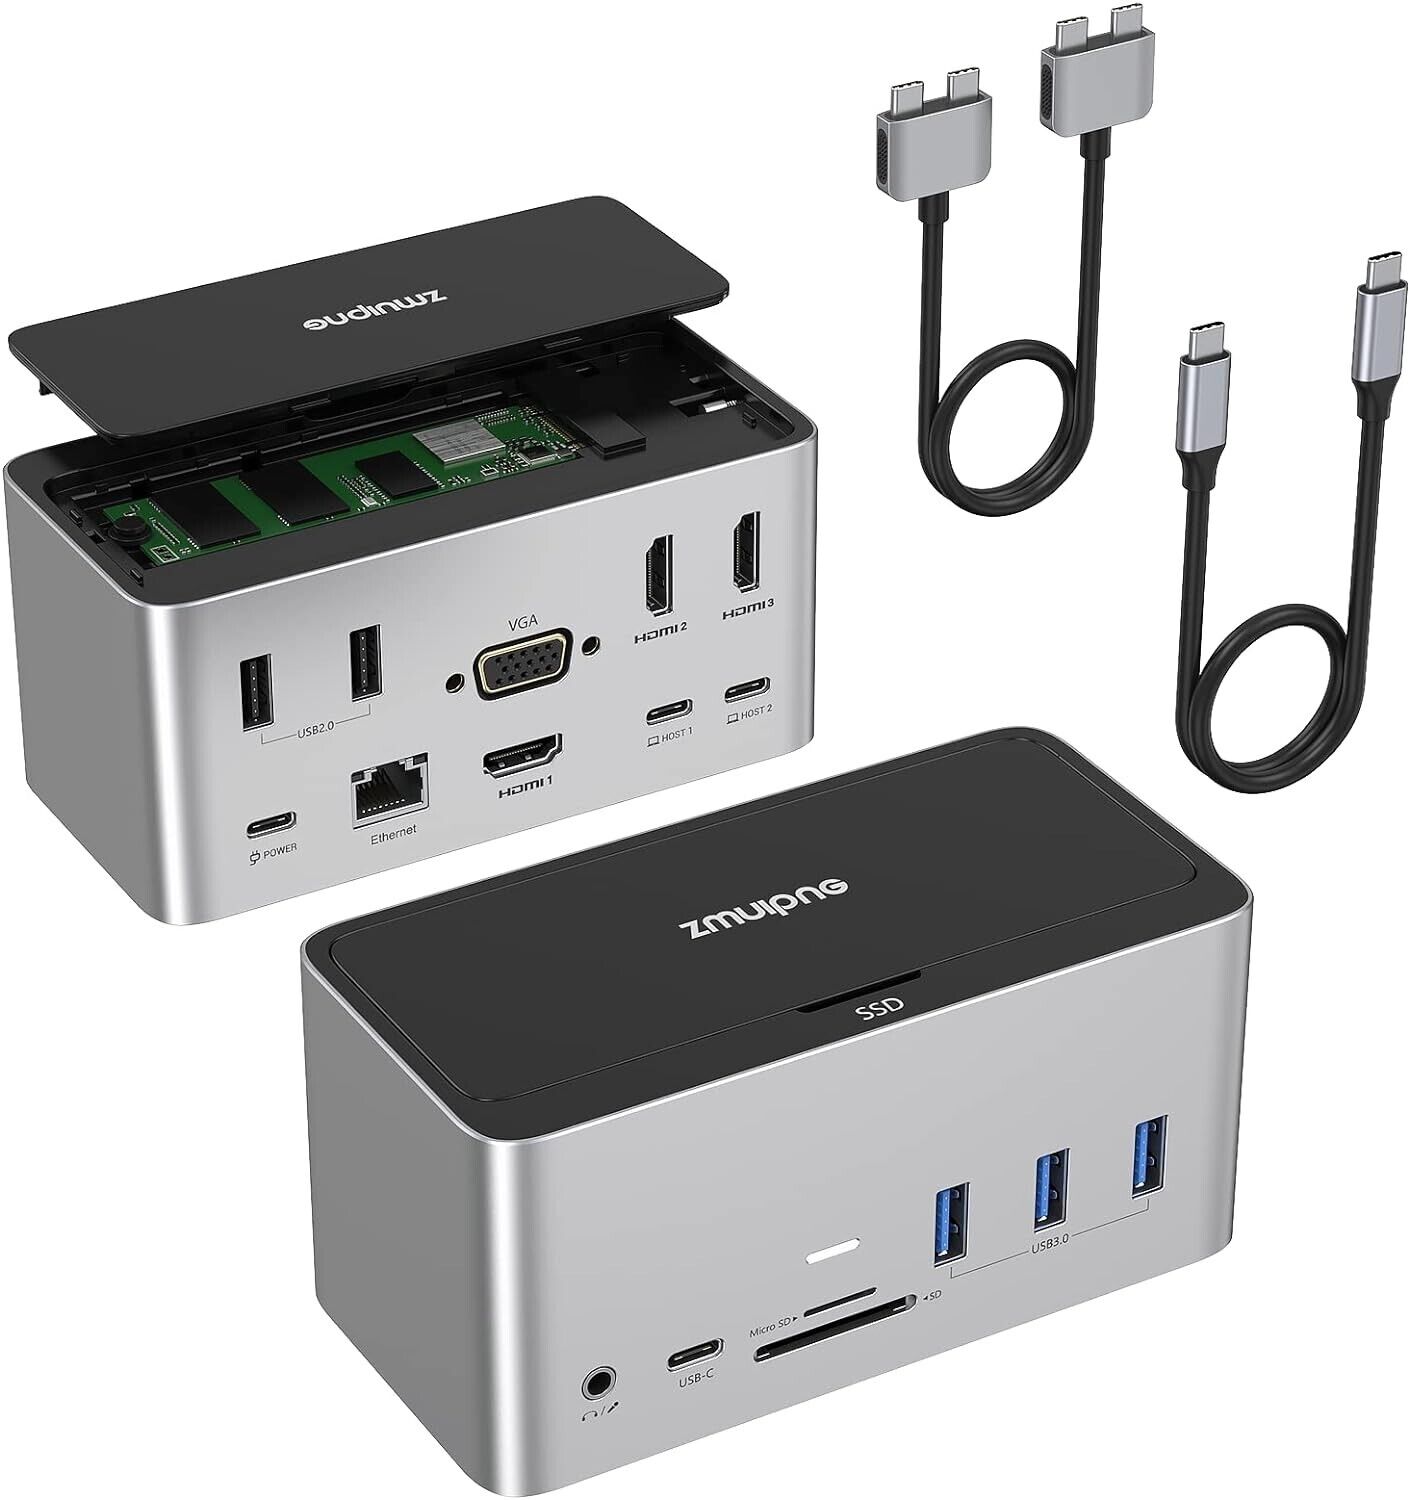 ZMUIPNG /Abiwazy 7 in 1 USB C Hub Dual Monitor Multiport Adapter Docking Station